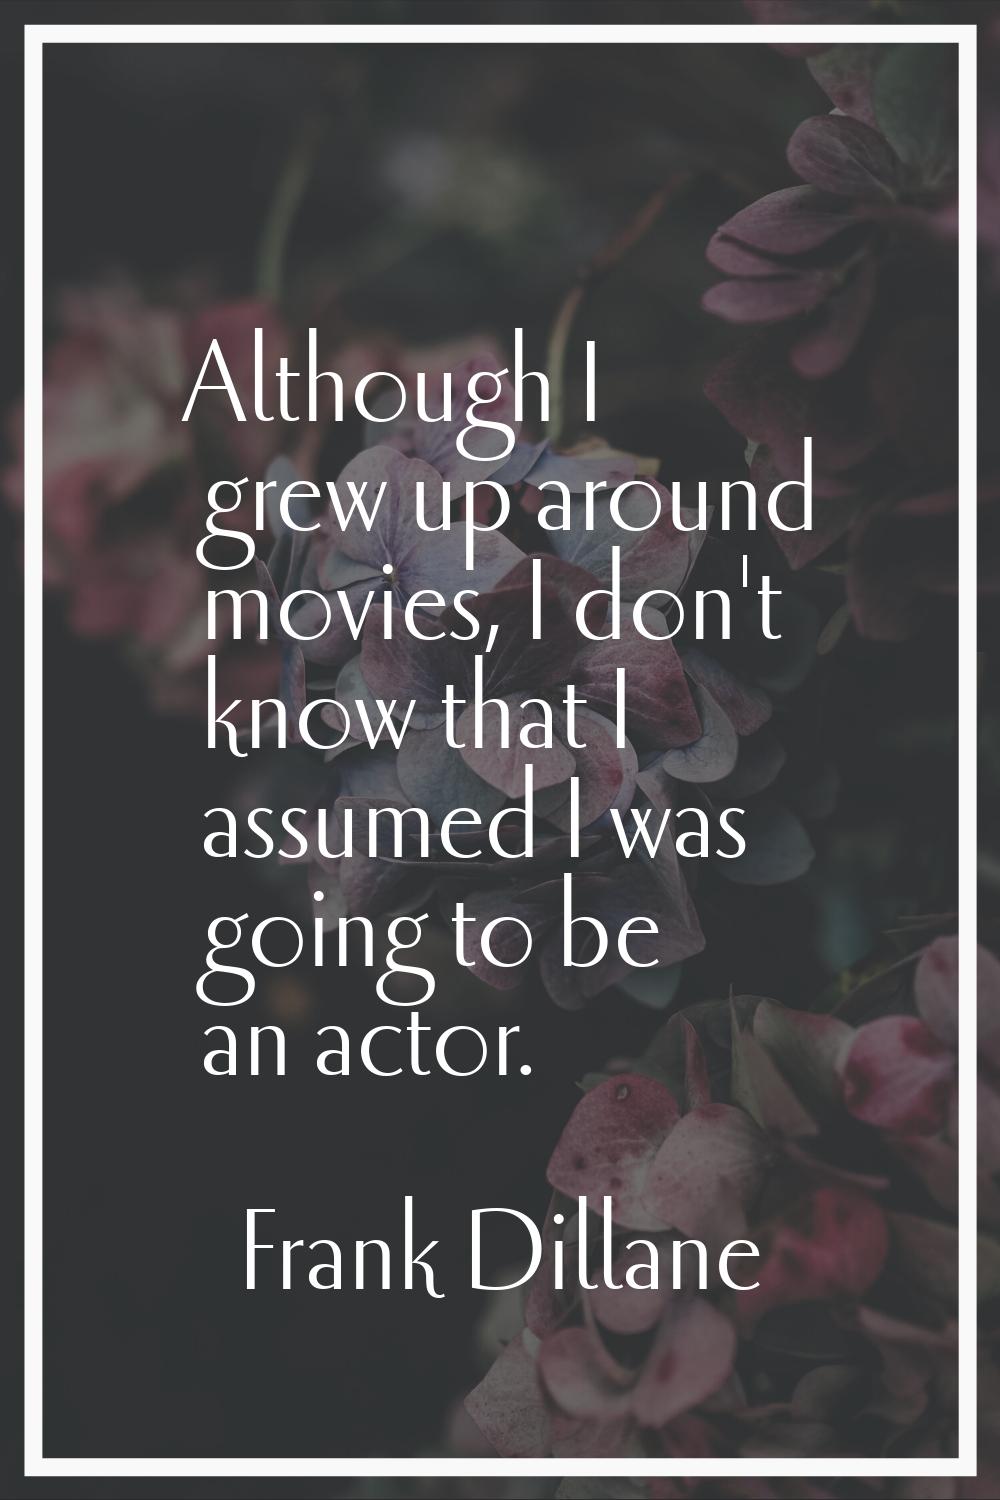 Although I grew up around movies, I don't know that I assumed I was going to be an actor.